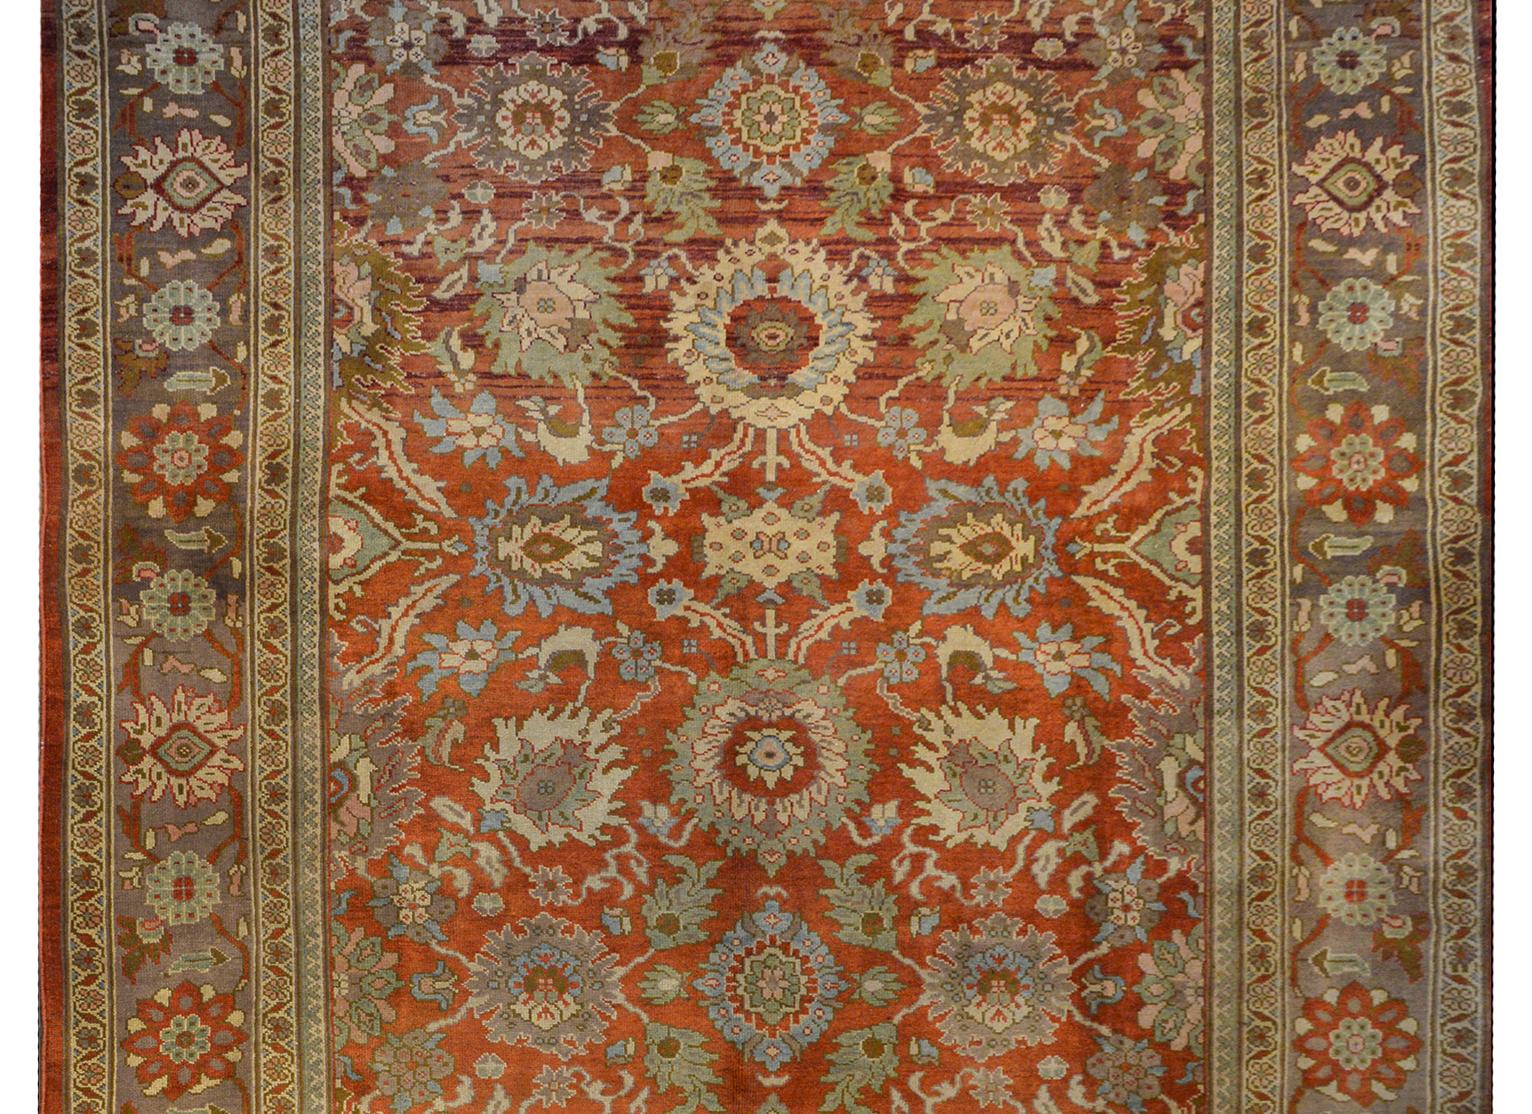 An extraordinary 21st century Persian Sultanabad rug with a wonderful bold large scale floral pattern woven in light indigo, pale yellow, pale green, olive green, and cream, all on an abrash rust colored background. The border is fantastic with a